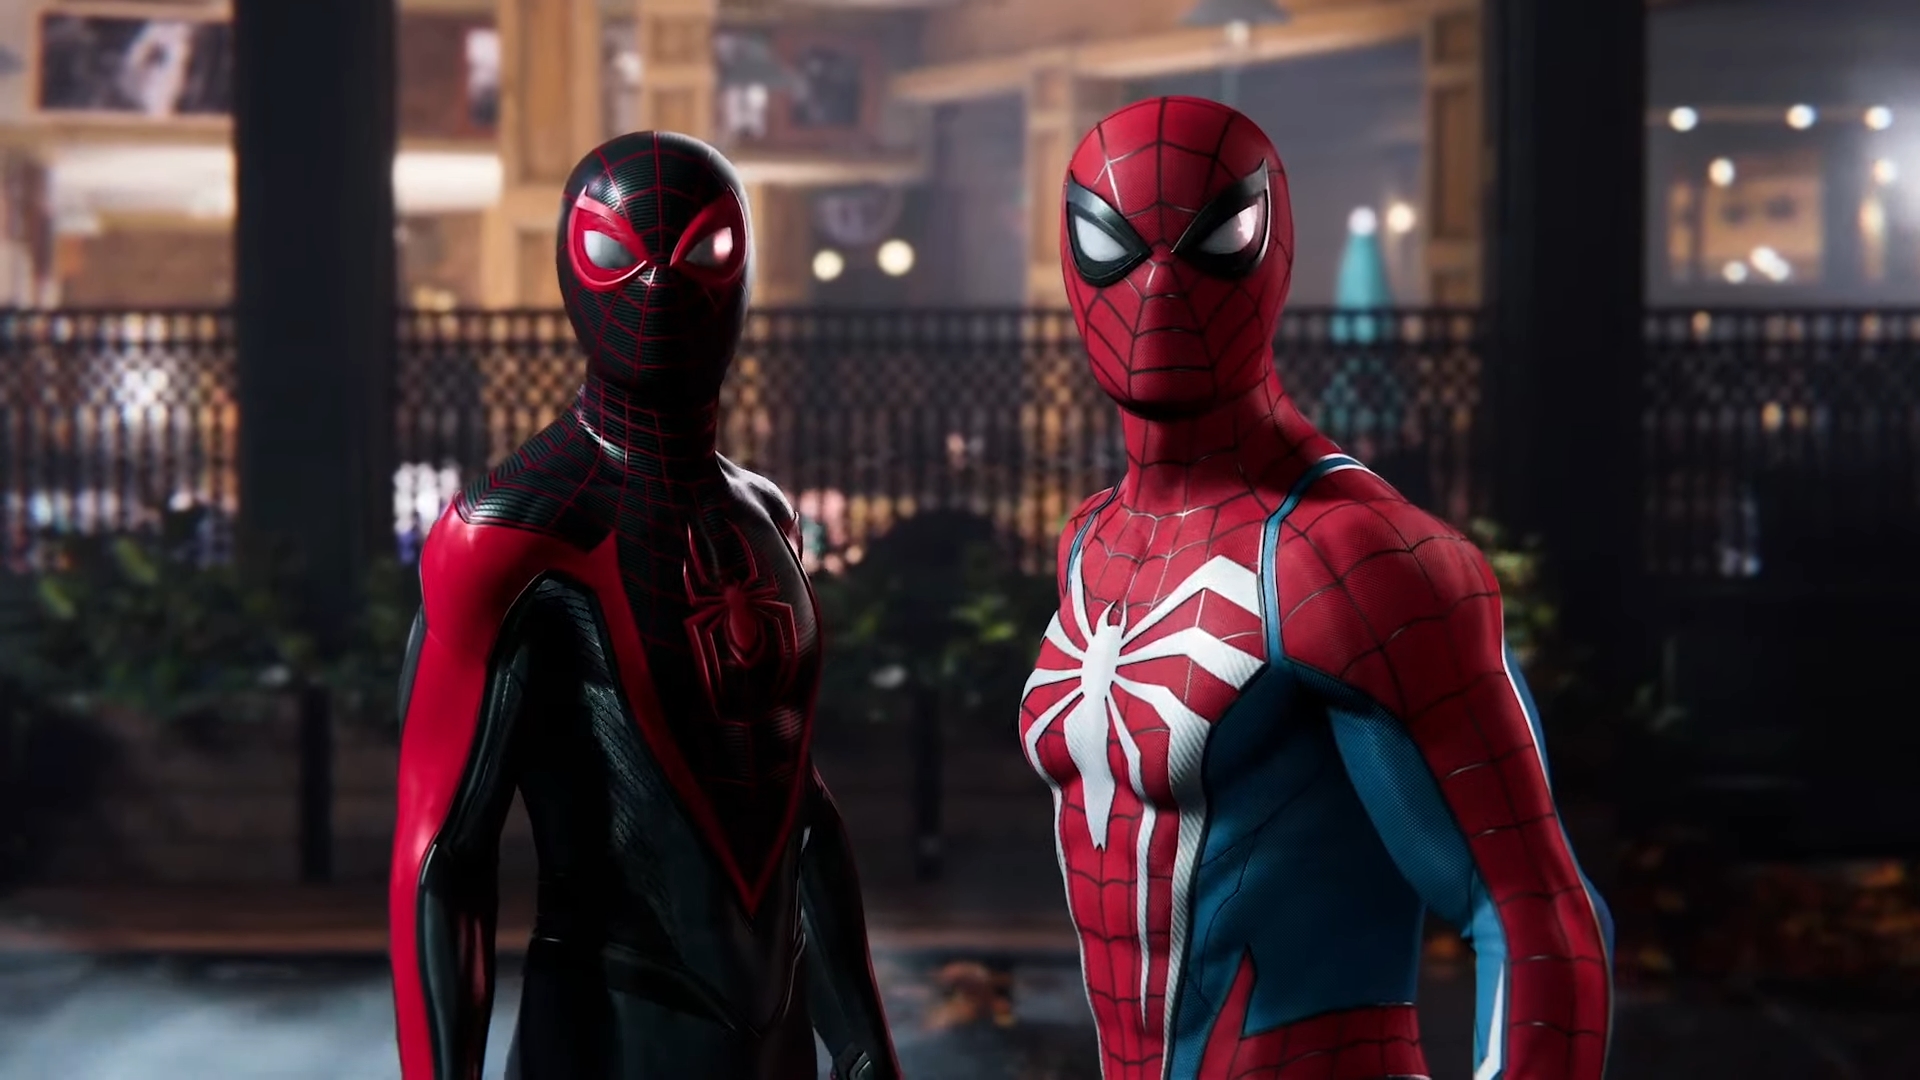 Marvel's Spider-Man 2 screenshot of Peter Parker and Miles Morales standing side by side in their Spider-Man outfits